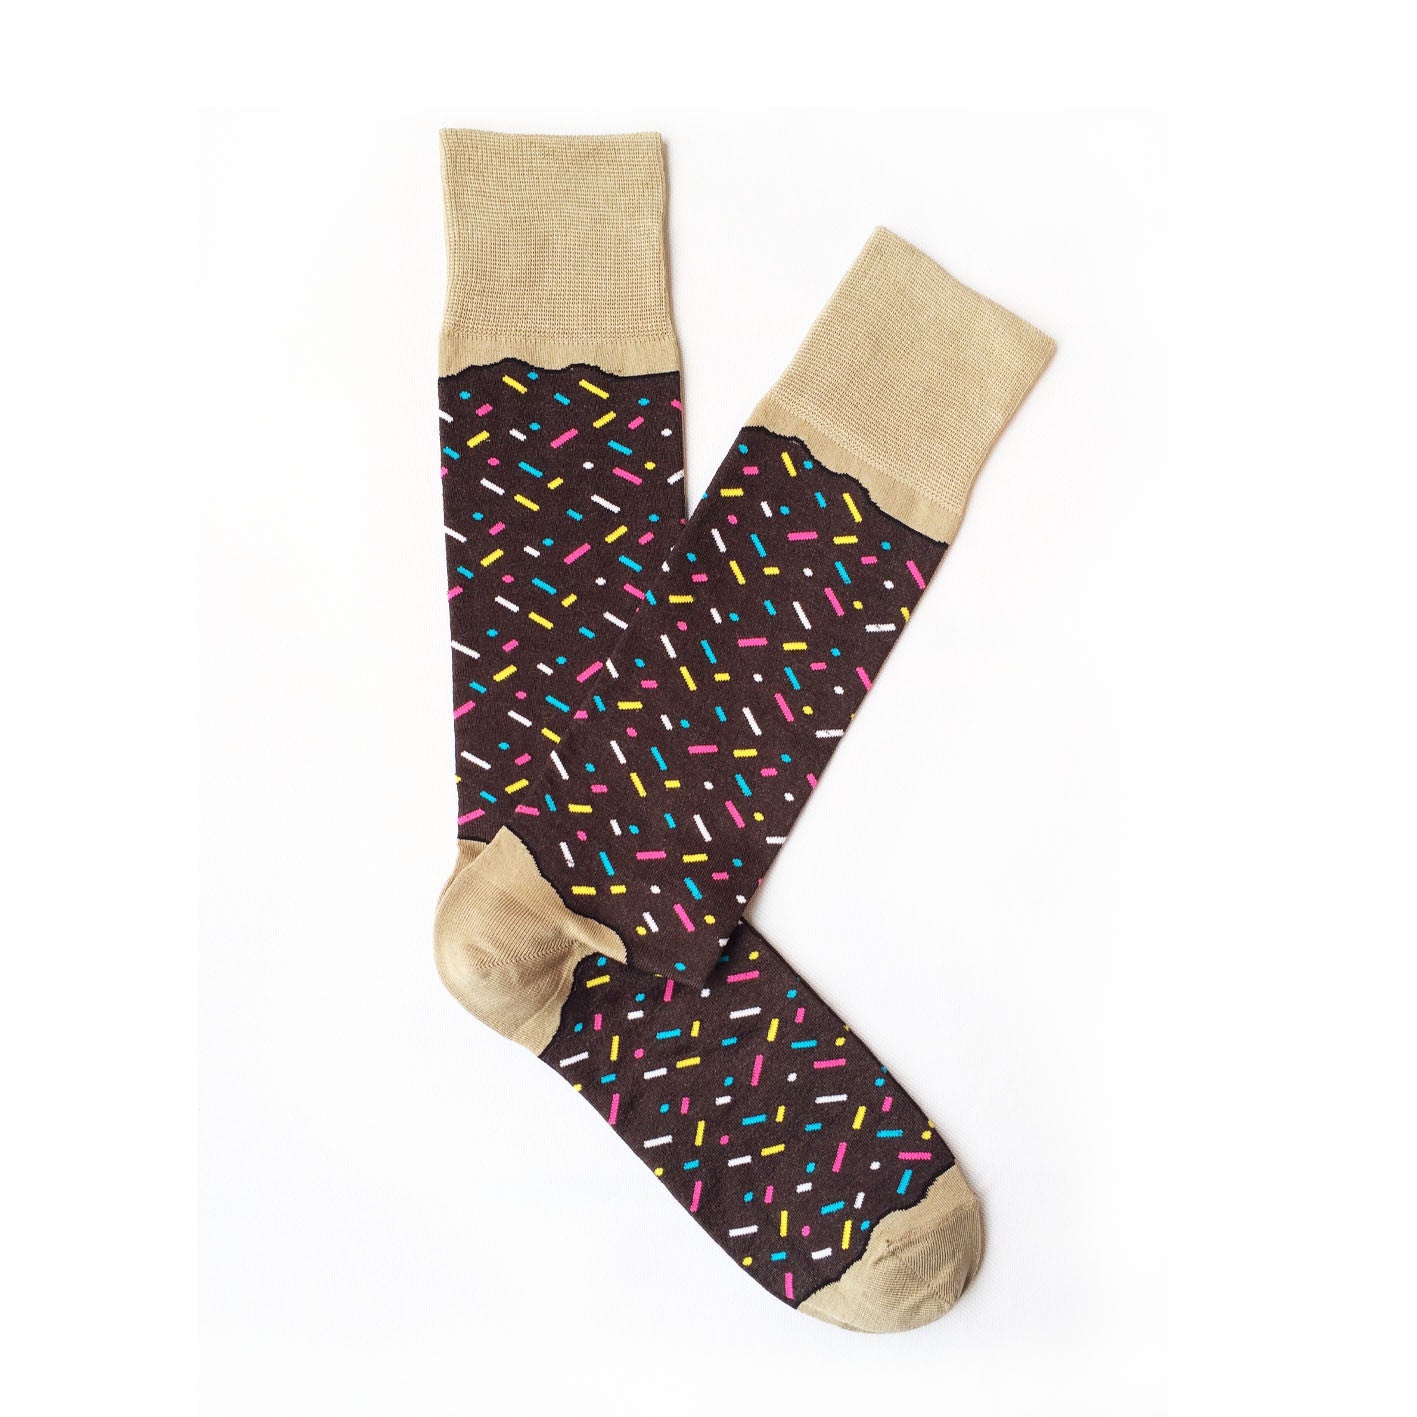 giraffecool-giraffe-cool-brand-chocolate-donut-brown-light-cream-and-colour-sparkles-Mercerized-And-Brushed-Cotton-Fashion-Socks-Pair-Open